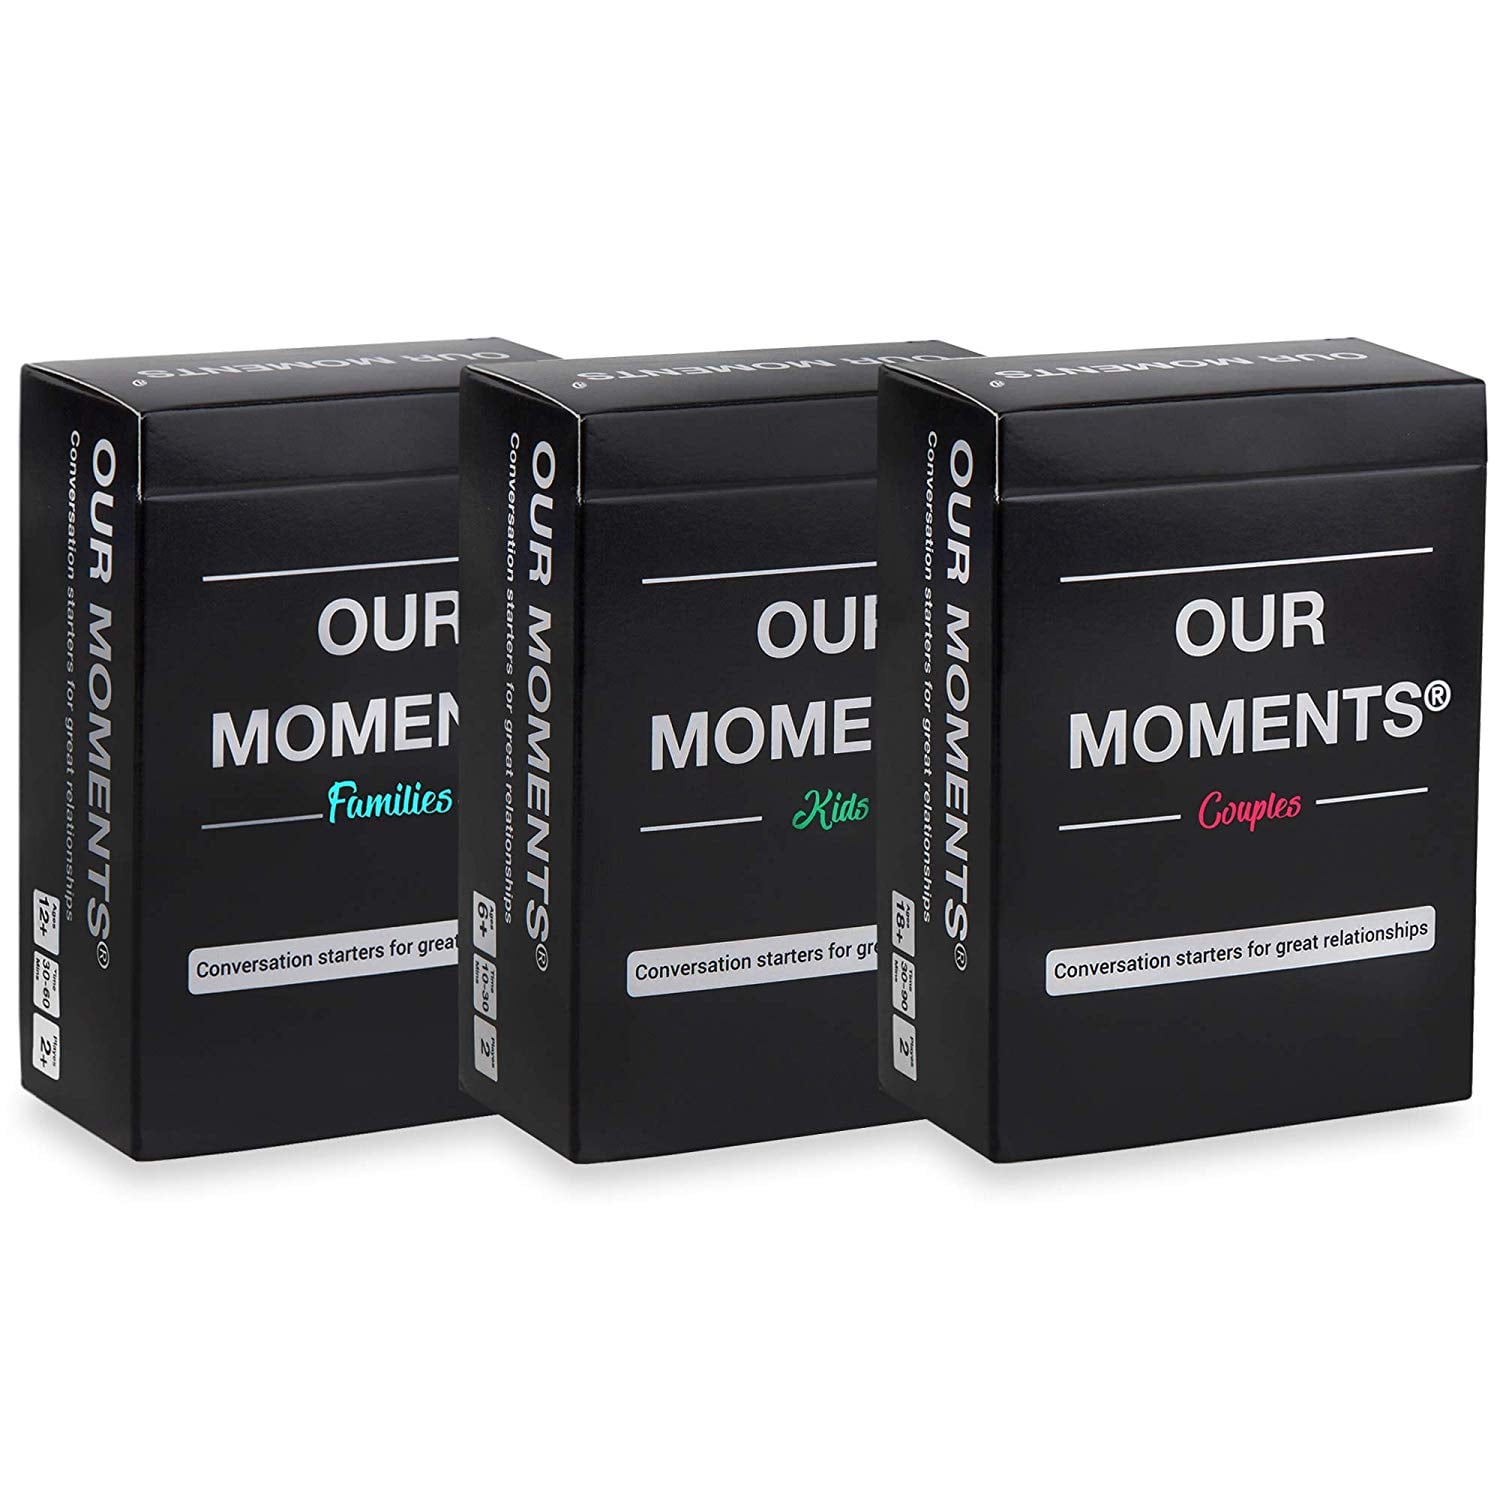 <p><a href="https://www.amazon.com/Our-Moments-Couples-Conversation-Relationships/dp/B07PG2ZLBR/">BUY NOW</a></p><p>$50</p><p><a href="https://www.amazon.com/Our-Moments-Couples-Conversation-Relationships/dp/B07PG2ZLBR/" class="ga-track"><strong>Our Moments Road Trip Bundle</strong></a> ($50)</p> <p>If you and your passenger need a little something to pass the time, try a card game. This particular conversation game includes over 300 thought-provoking questions, with dedicated packs for couples, families, or kids.</p>